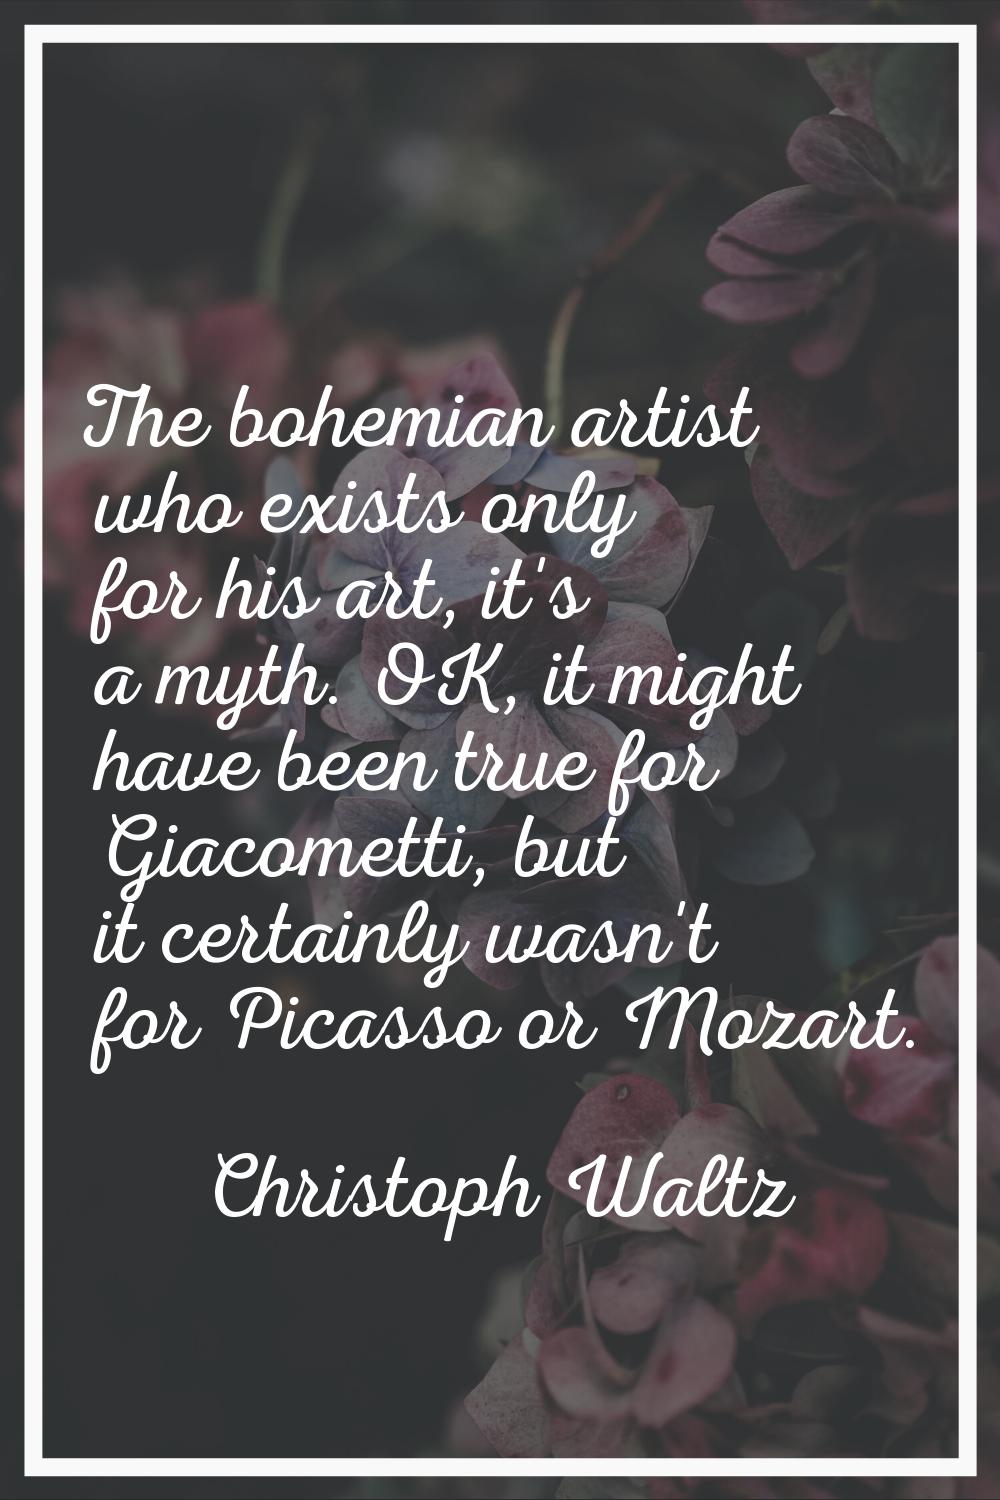 The bohemian artist who exists only for his art, it's a myth. OK, it might have been true for Giaco